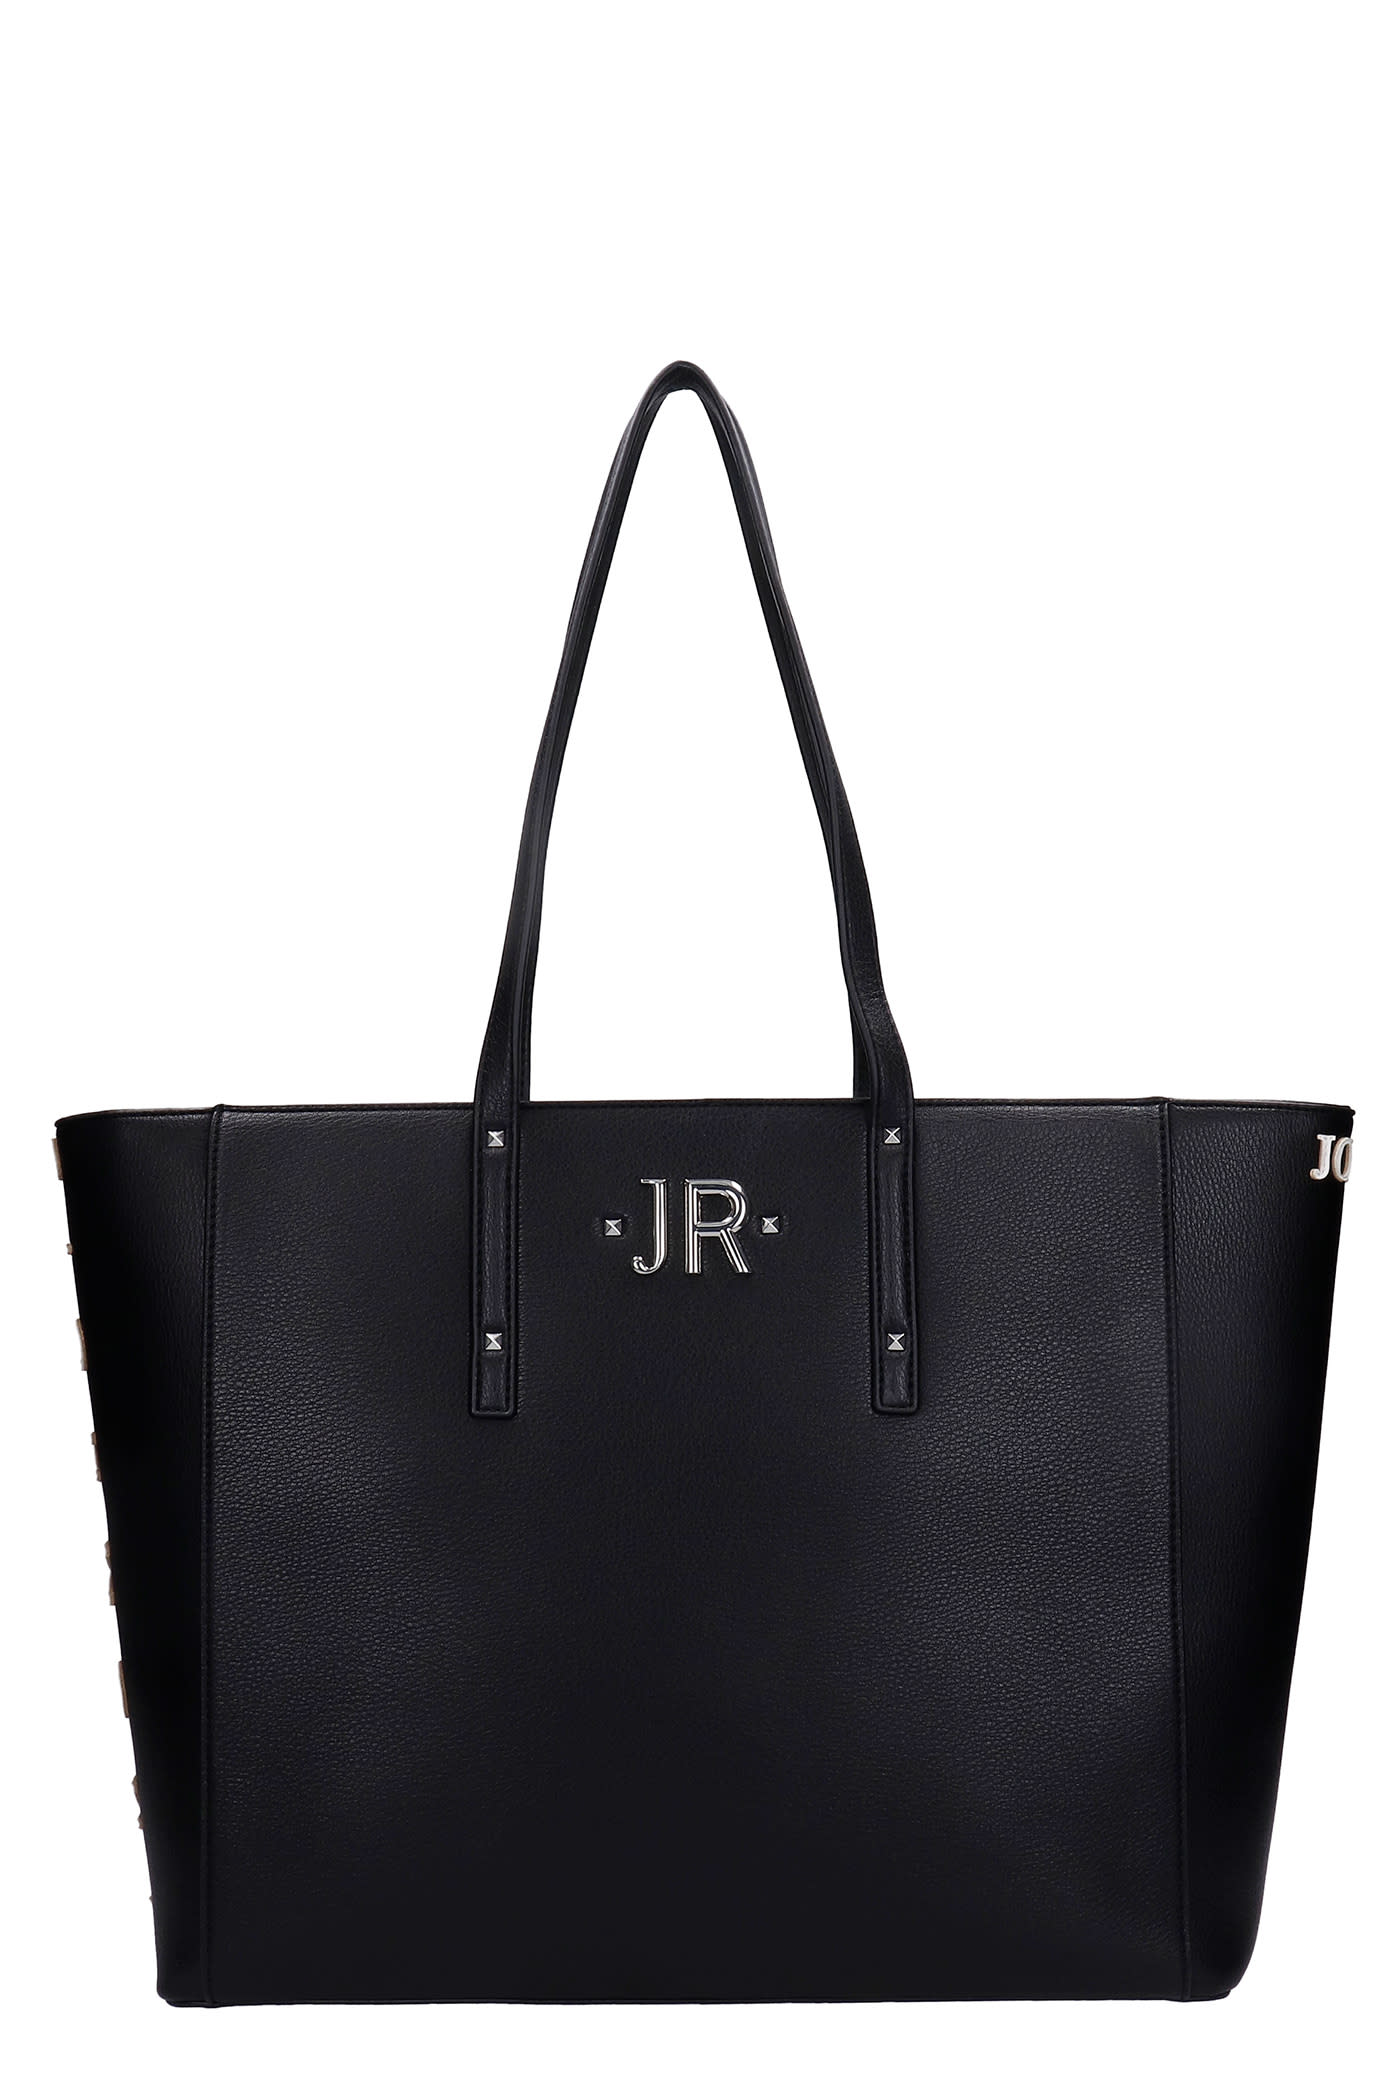 John Richmond Hunting Tote In Black Leather